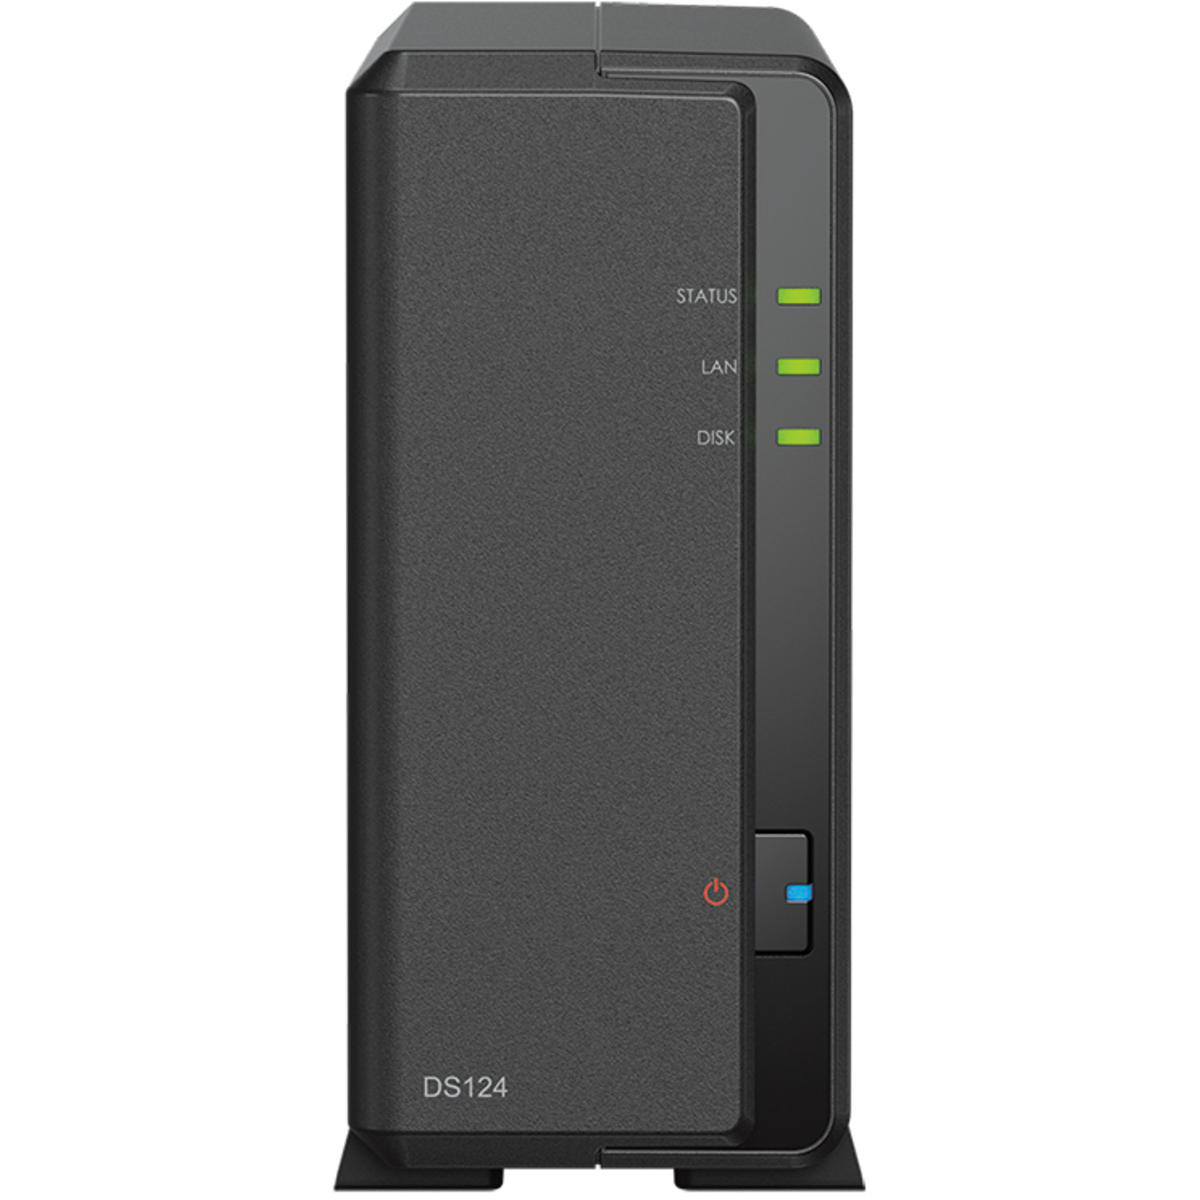 Synology DiskStation DS124 6tb 1-Bay Desktop Personal / Basic Home / Small Office NAS - Network Attached Storage Device 1x6tb Western Digital Red Pro WD6003FFBX 3.5 7200rpm SATA 6Gb/s HDD NAS Class Drives Installed - Burn-In Tested DiskStation DS124